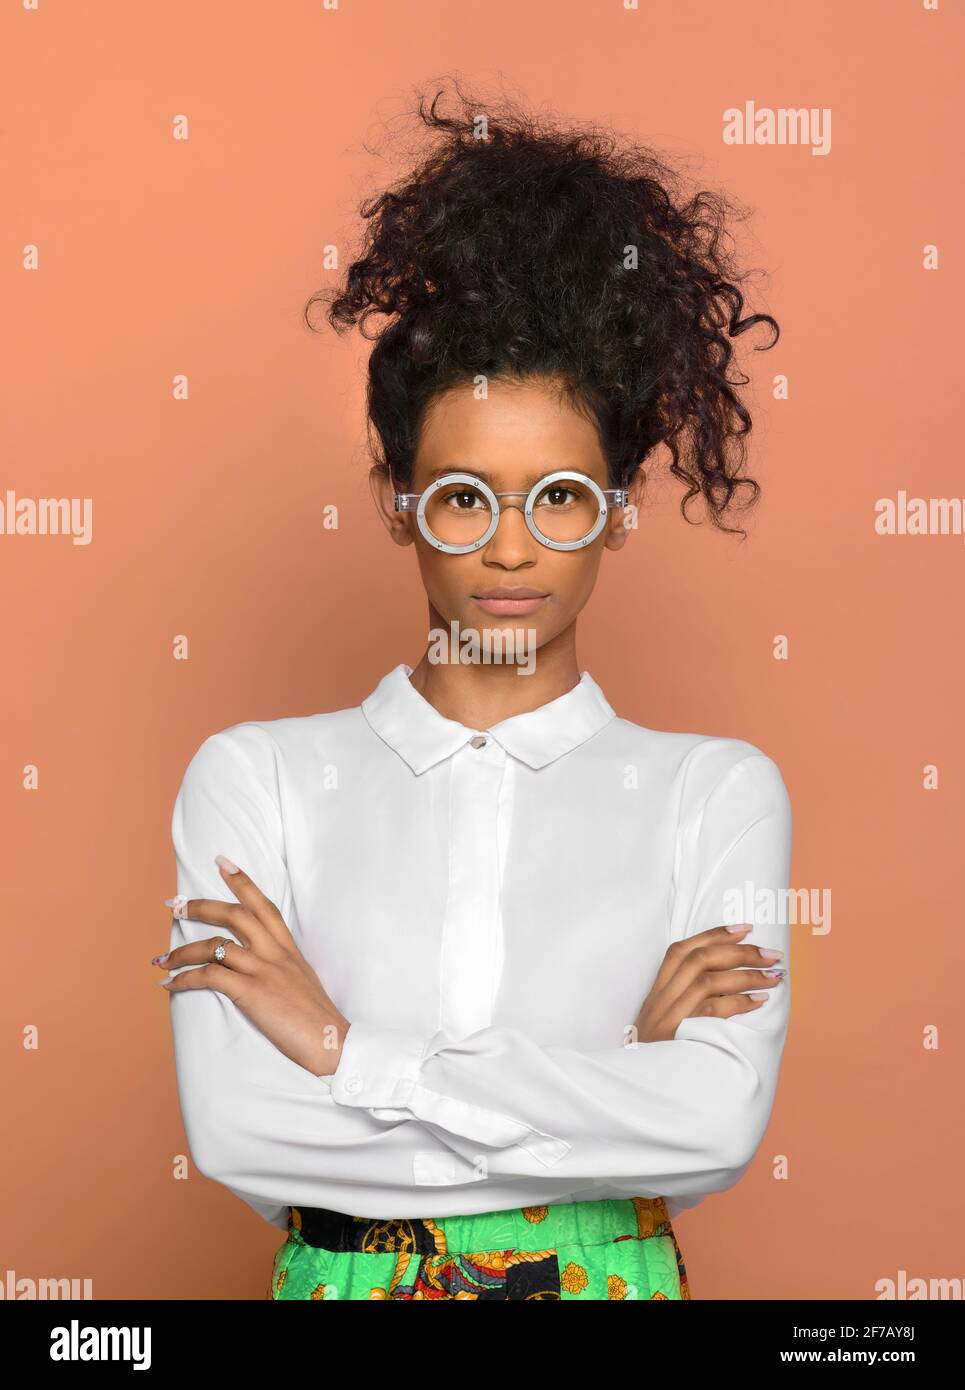 Serious confident black woman with her long curly hat tied to the top of her head standing wearing round eyeglasses staring at the camera over a studi Stock Photo